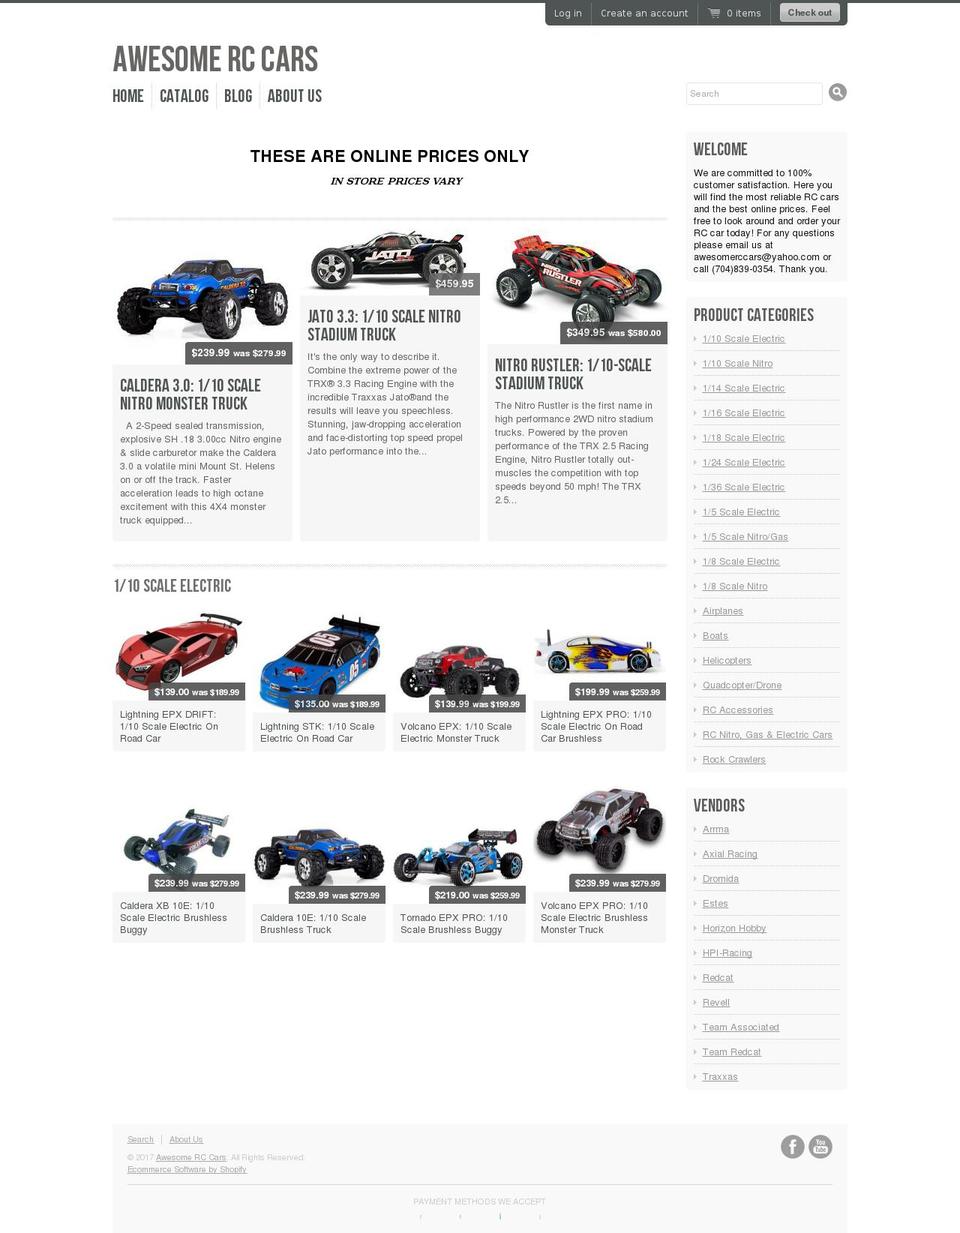 Radiance Shopify theme site example xrccars.com